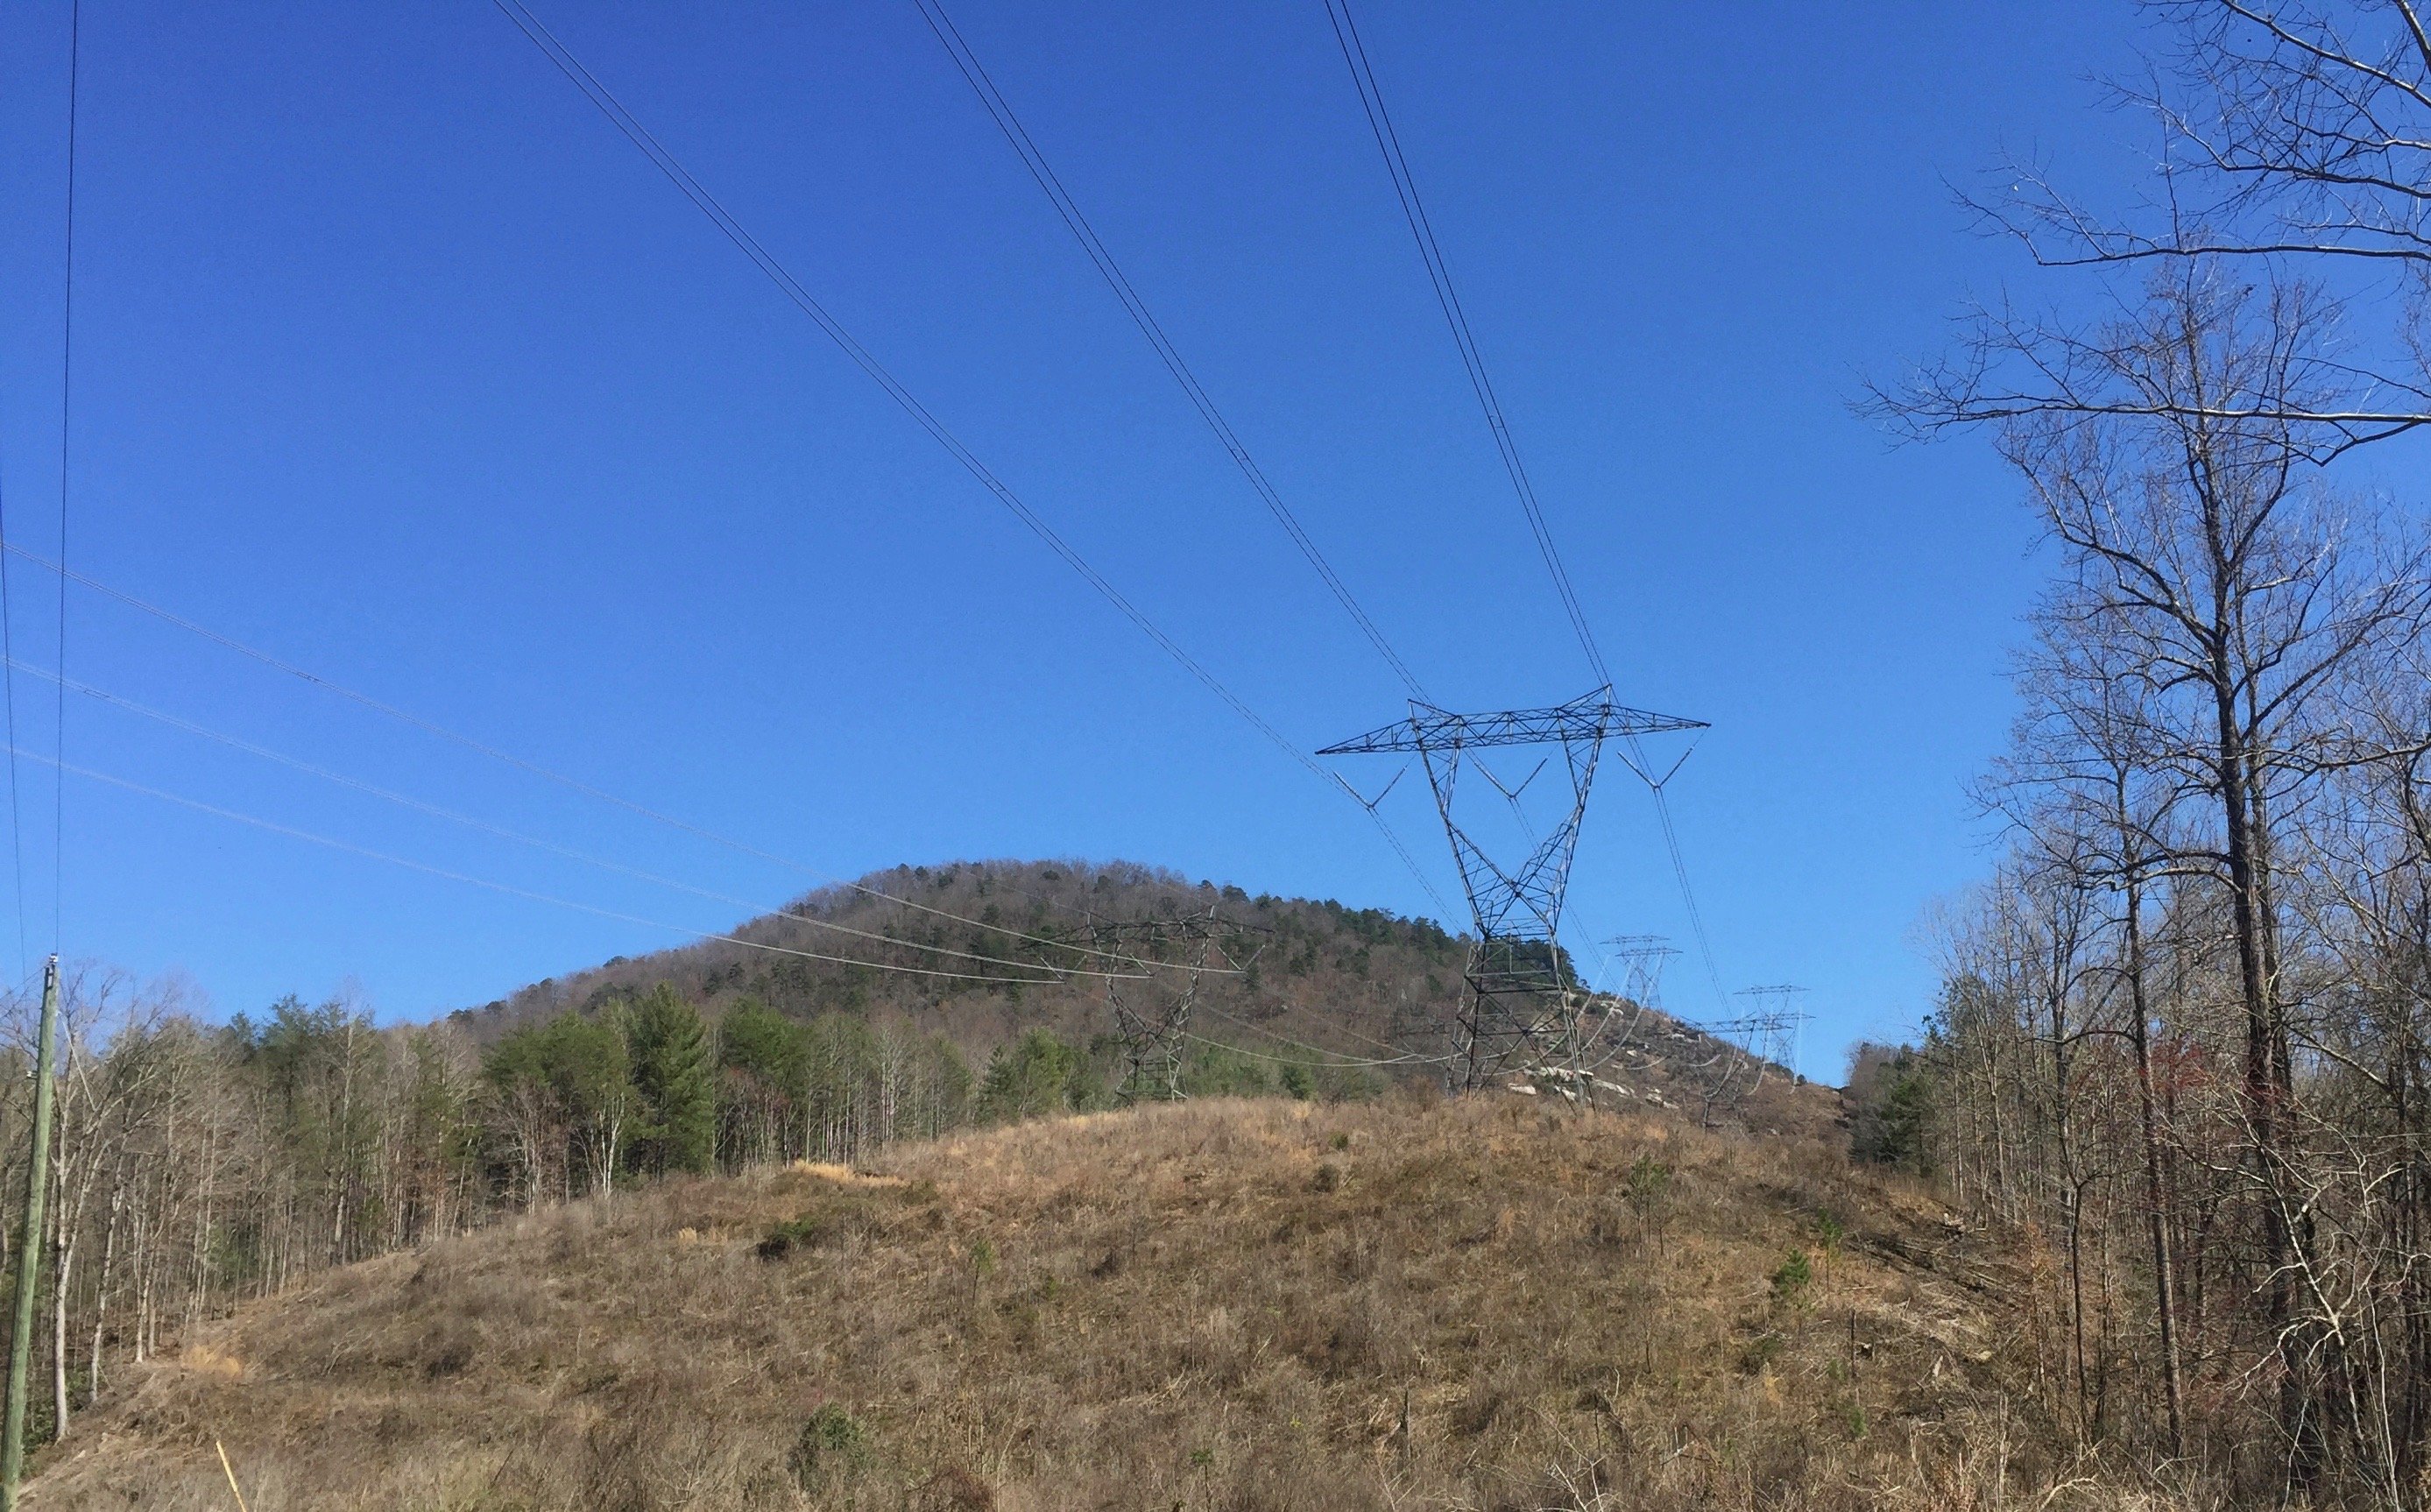 Duke Energy transmission lines serving Oconee Nuclear Station in Pickens County